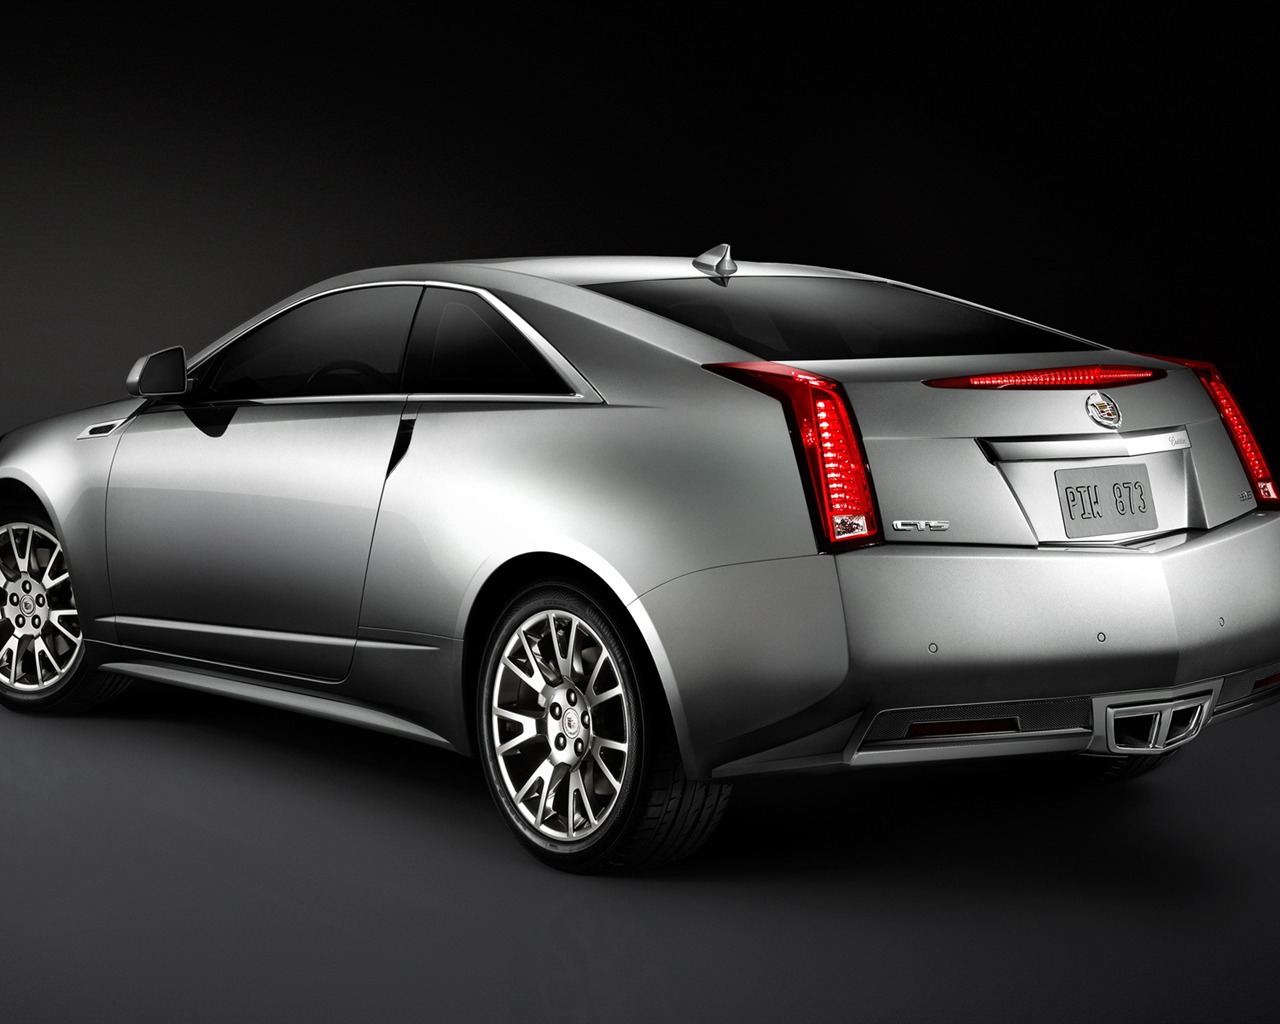 Cadillac CTS Coupe - 2011 HD Wallpaper #6 - 1280x1024